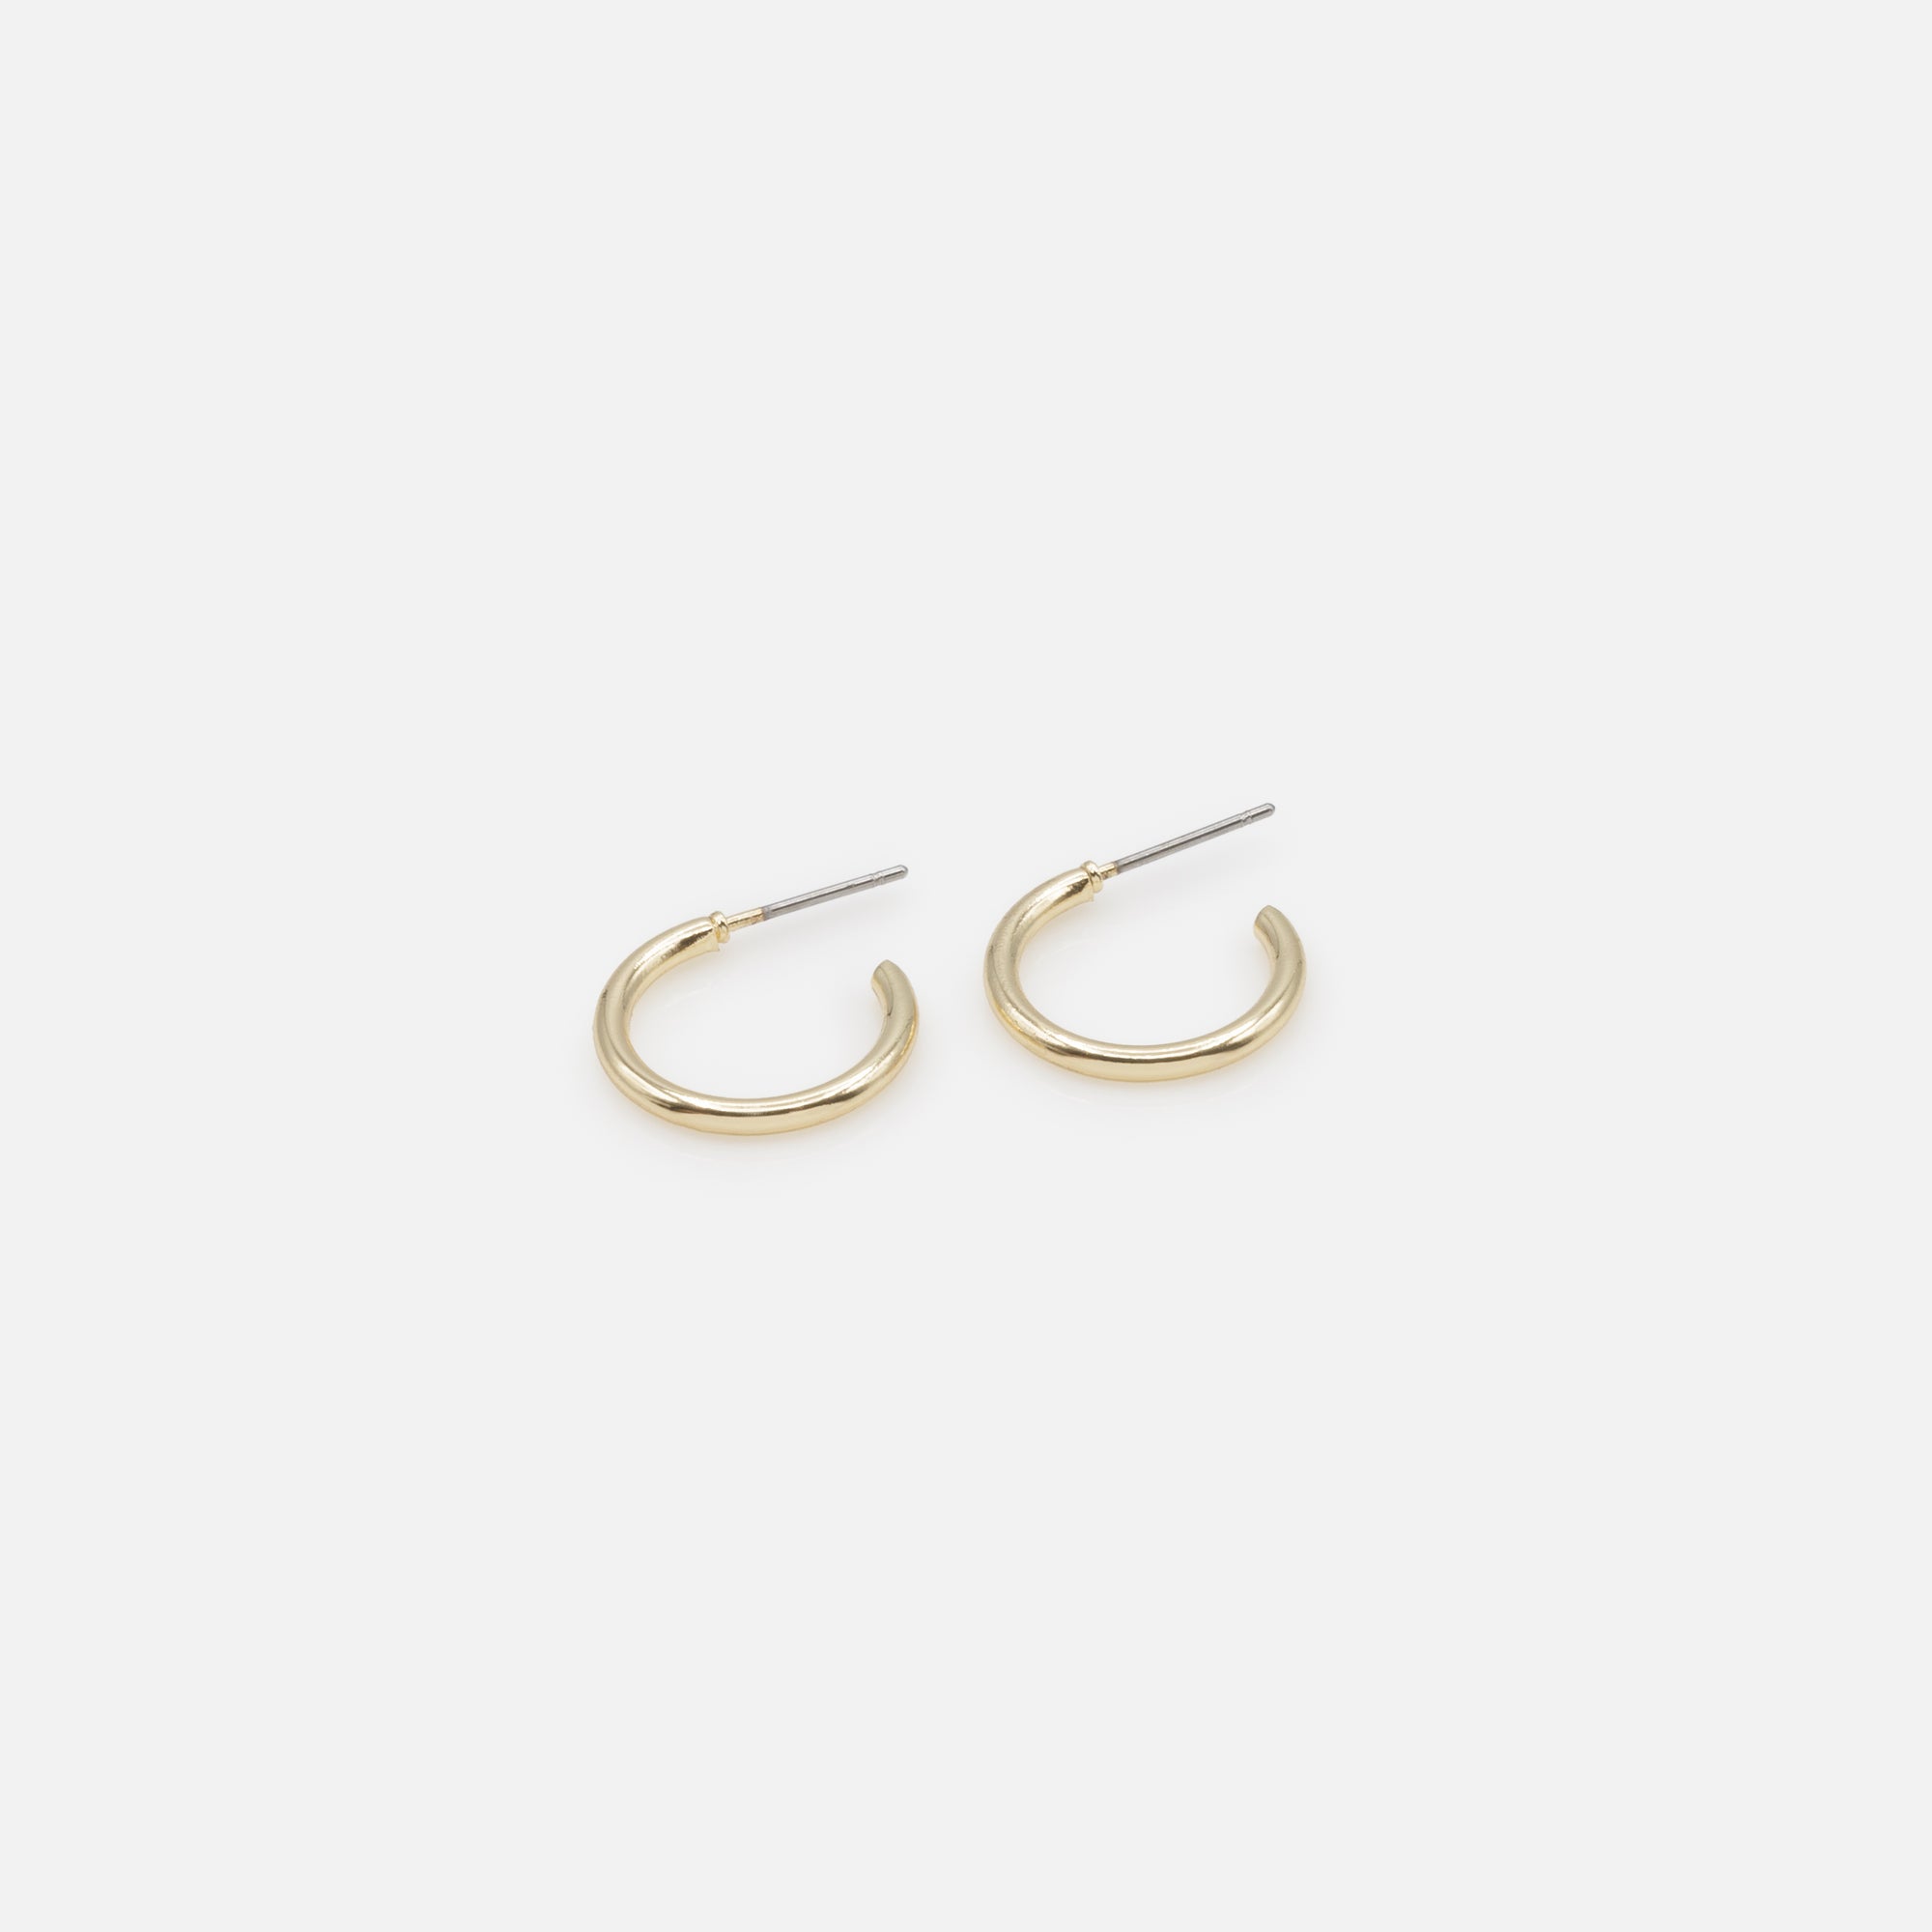 Duo of simple gold hoop earrings with white band